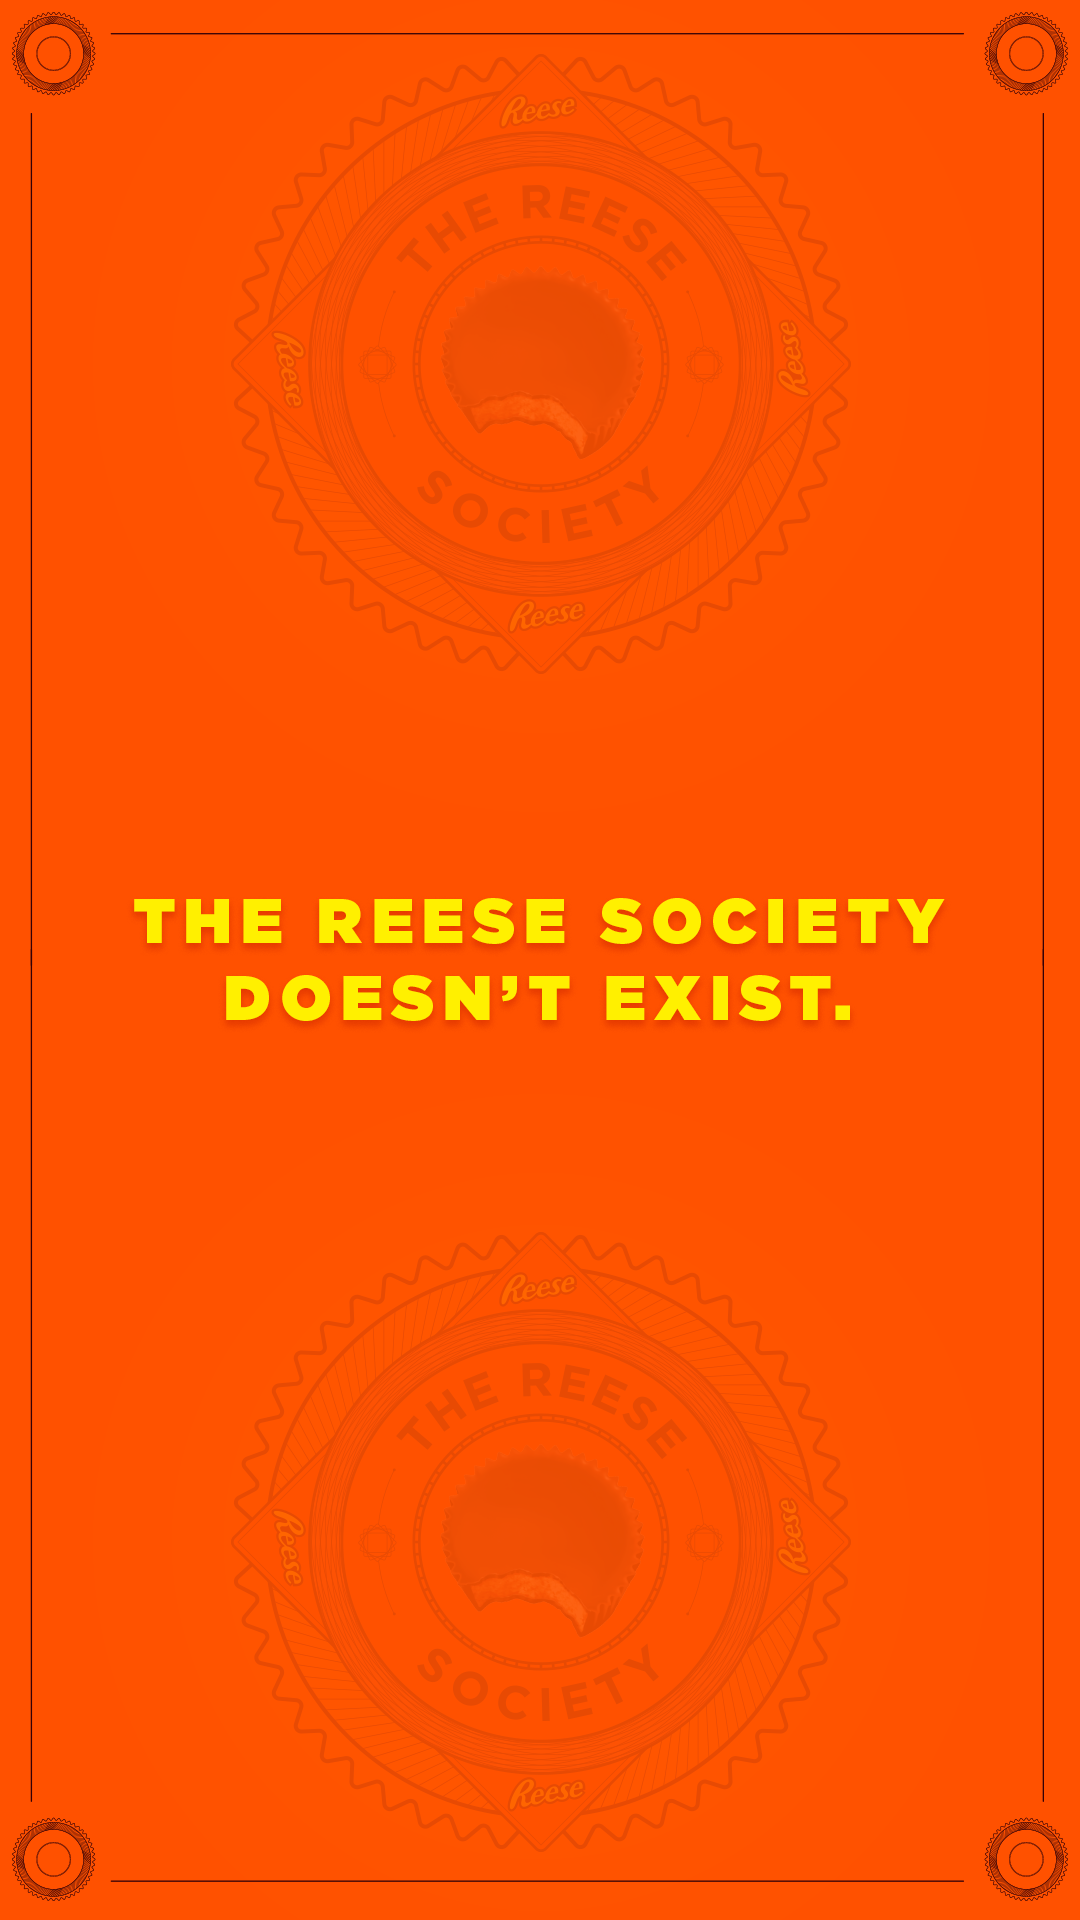 Reese-Society-IG_0038_The-Reese-Society-doesn’t-exist.png